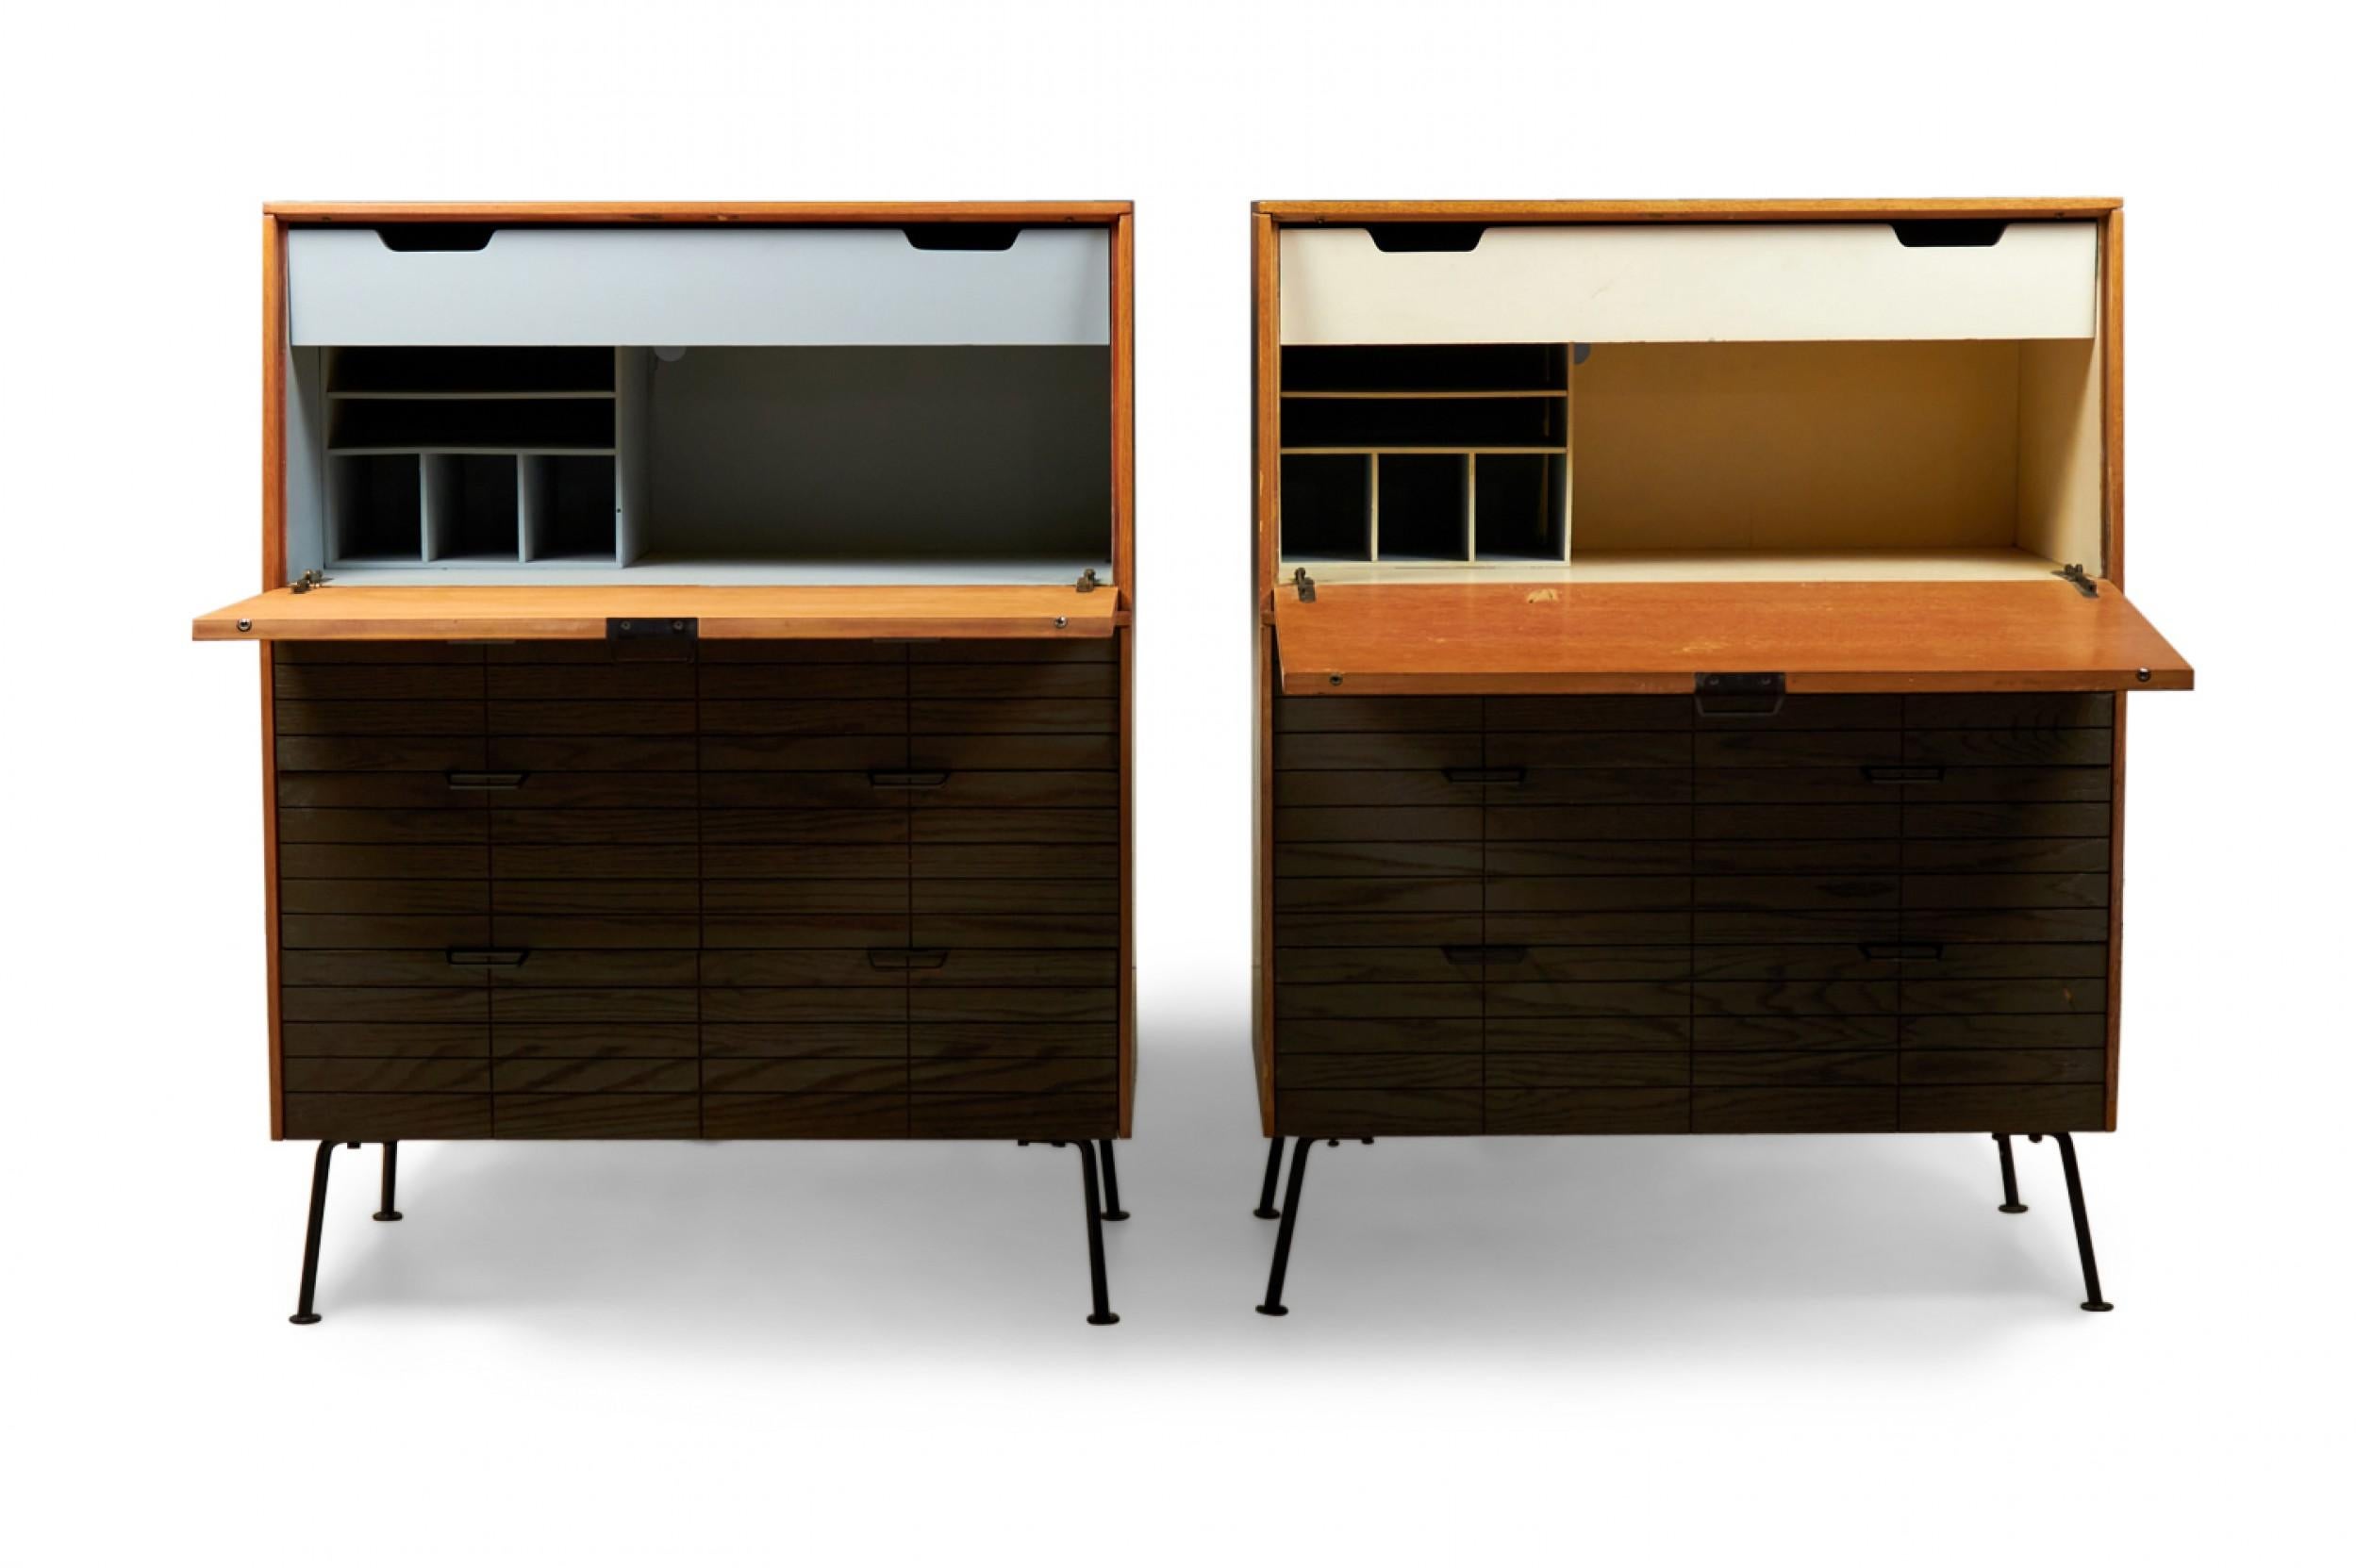 2 American mid-century fall front secretary cabinets with light walnut cases and a front doors that open to create a desk surface and reveal a light gray or beige painted interior with various storage compartments above a 6-drawer cabinet bottom